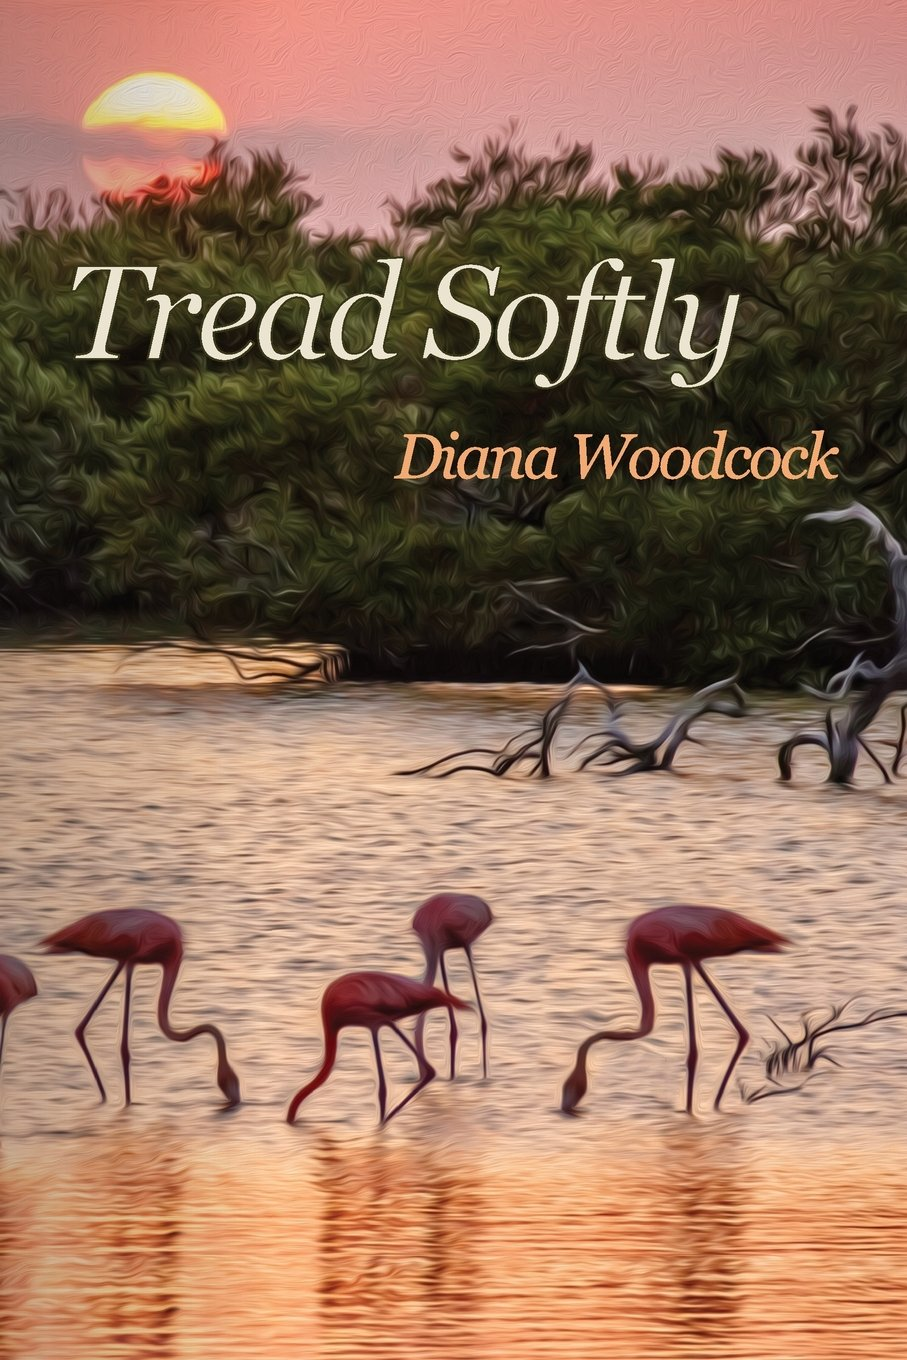 Book cover of TREAD SOFTLY by Dr. Diana Woodcock features pink flamingoes in a mangrove under a setting sun.